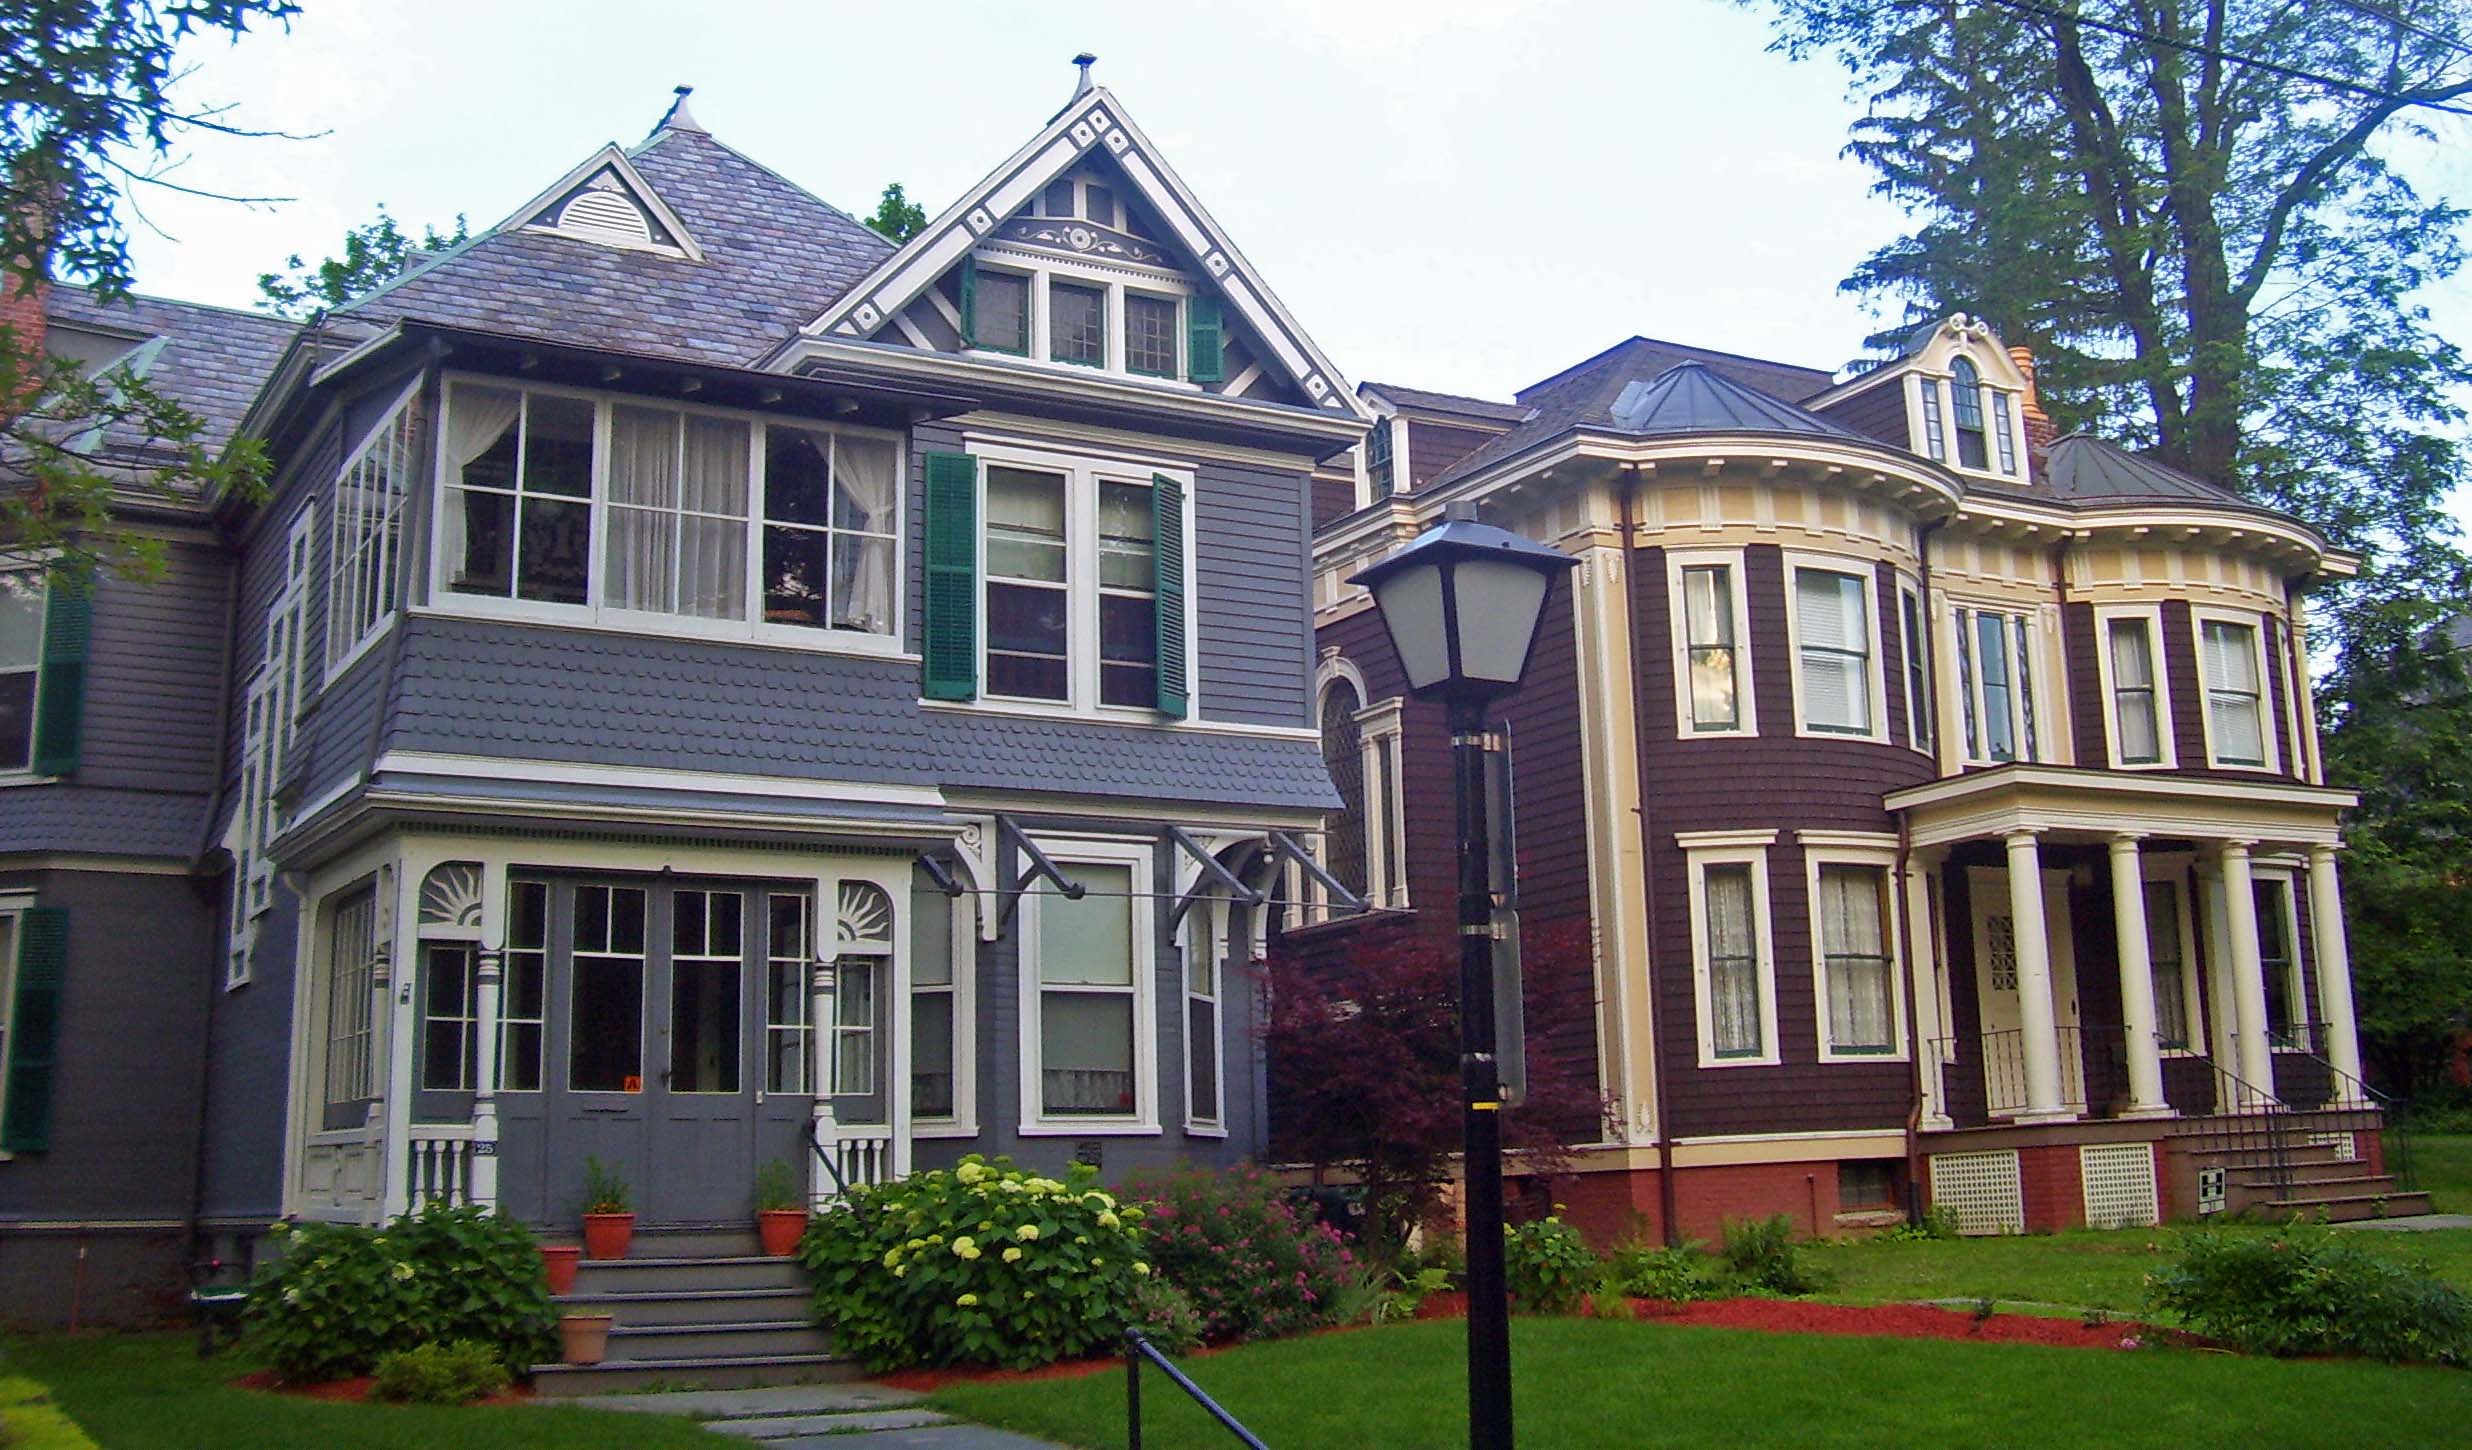 File:Houses on Garfield Place, Poughkeepsie, NY.jpg - Wikimedia Commons